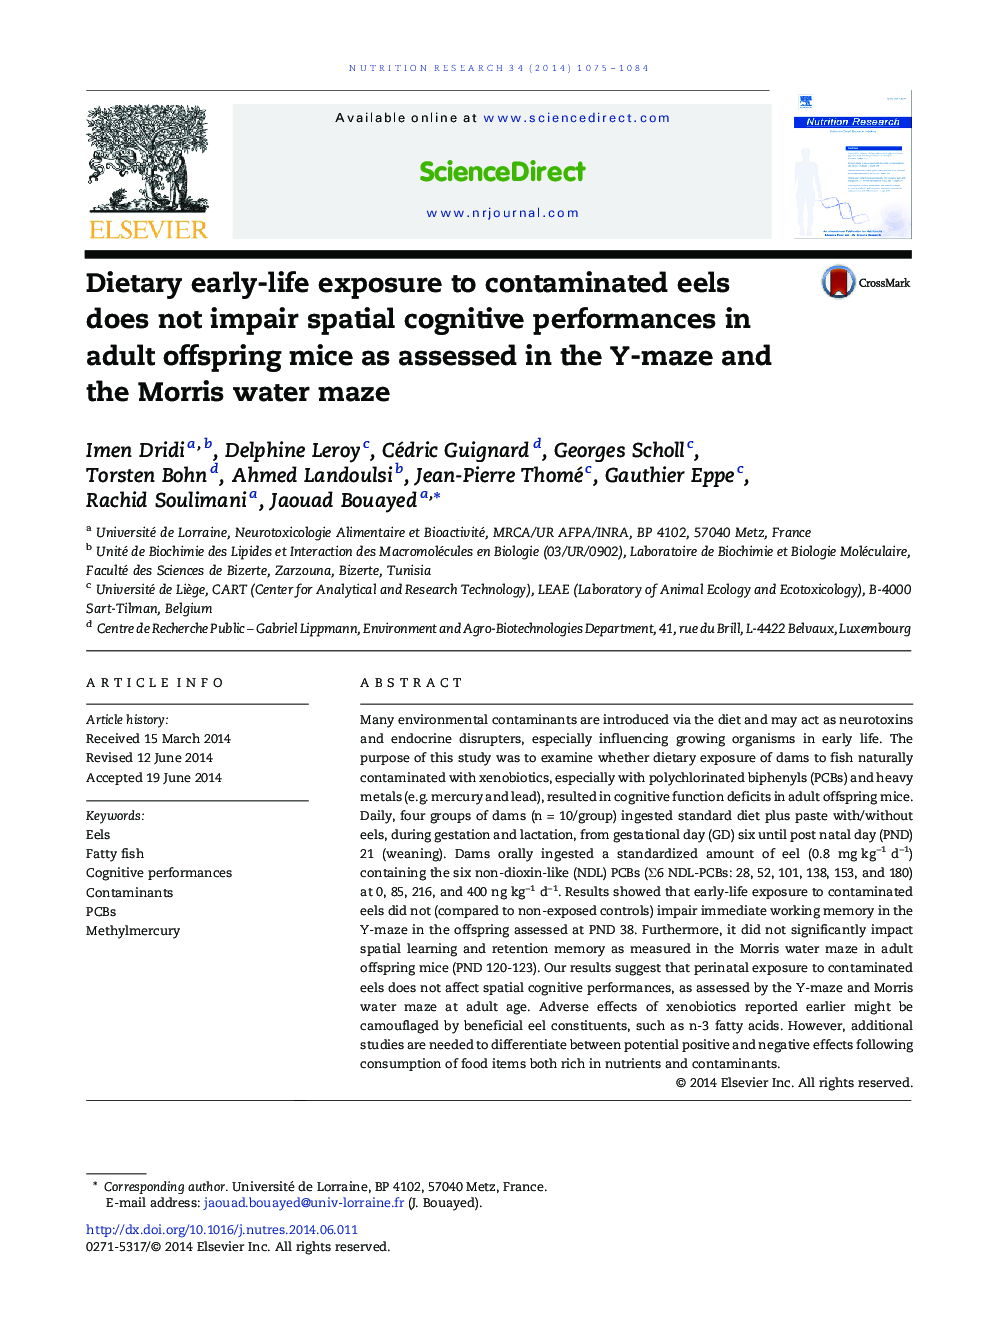 Dietary early-life exposure to contaminated eels does not impair spatial cognitive performances in adult offspring mice as assessed in the Y-maze and the Morris water maze